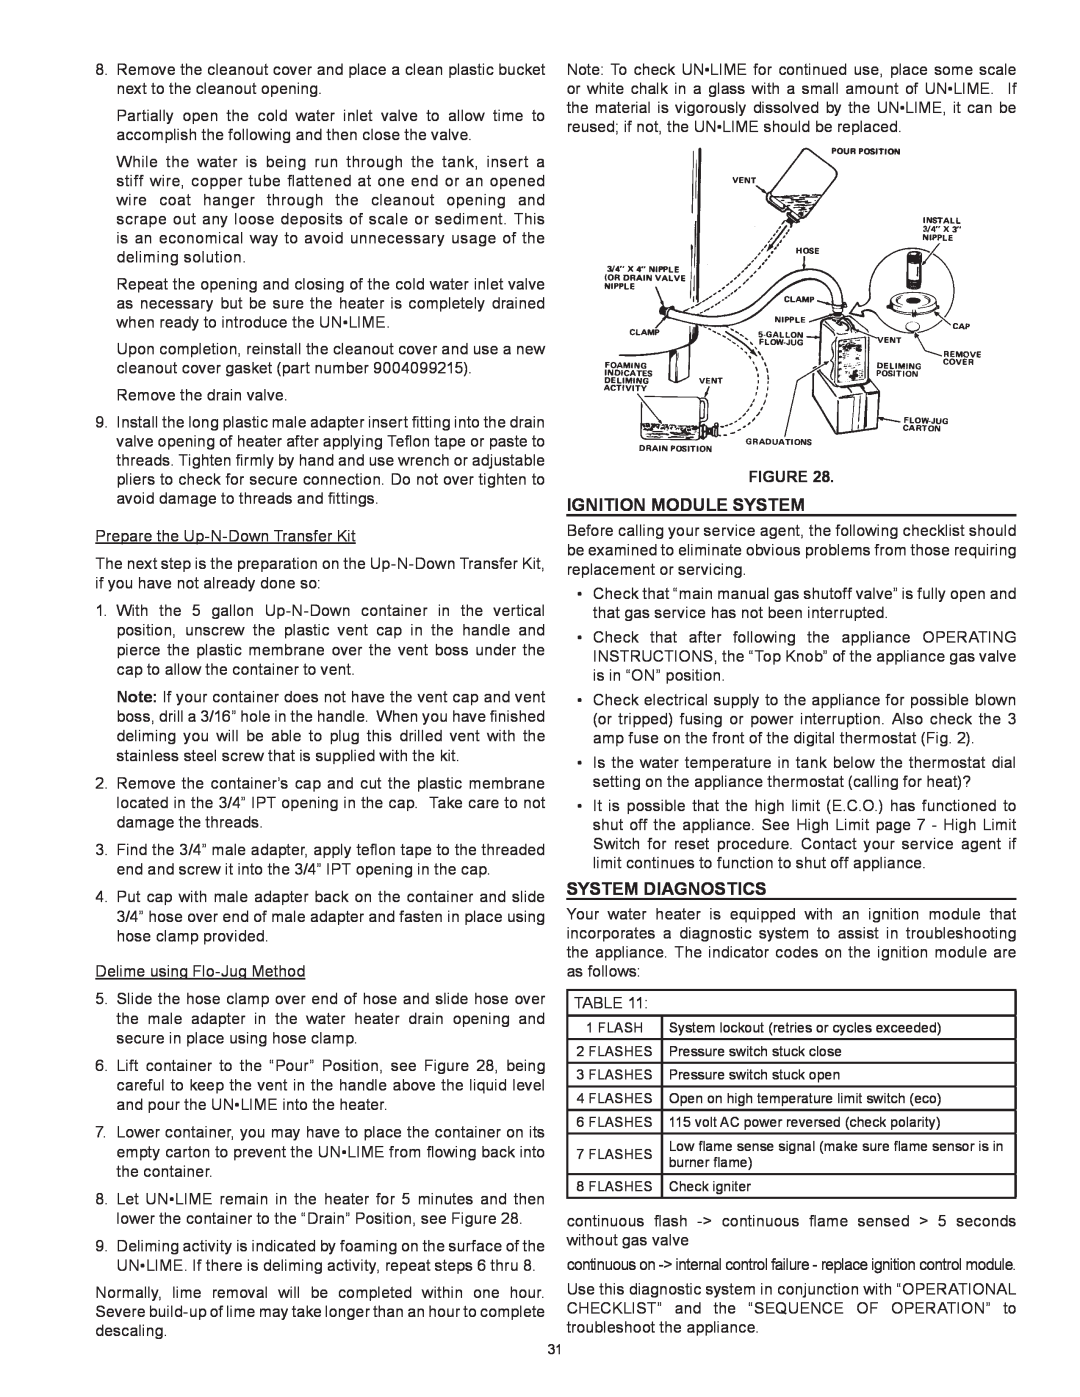 Reliance Water Heaters N71120NE, N85390NE instruction manual ignition module system, system diagnostics 